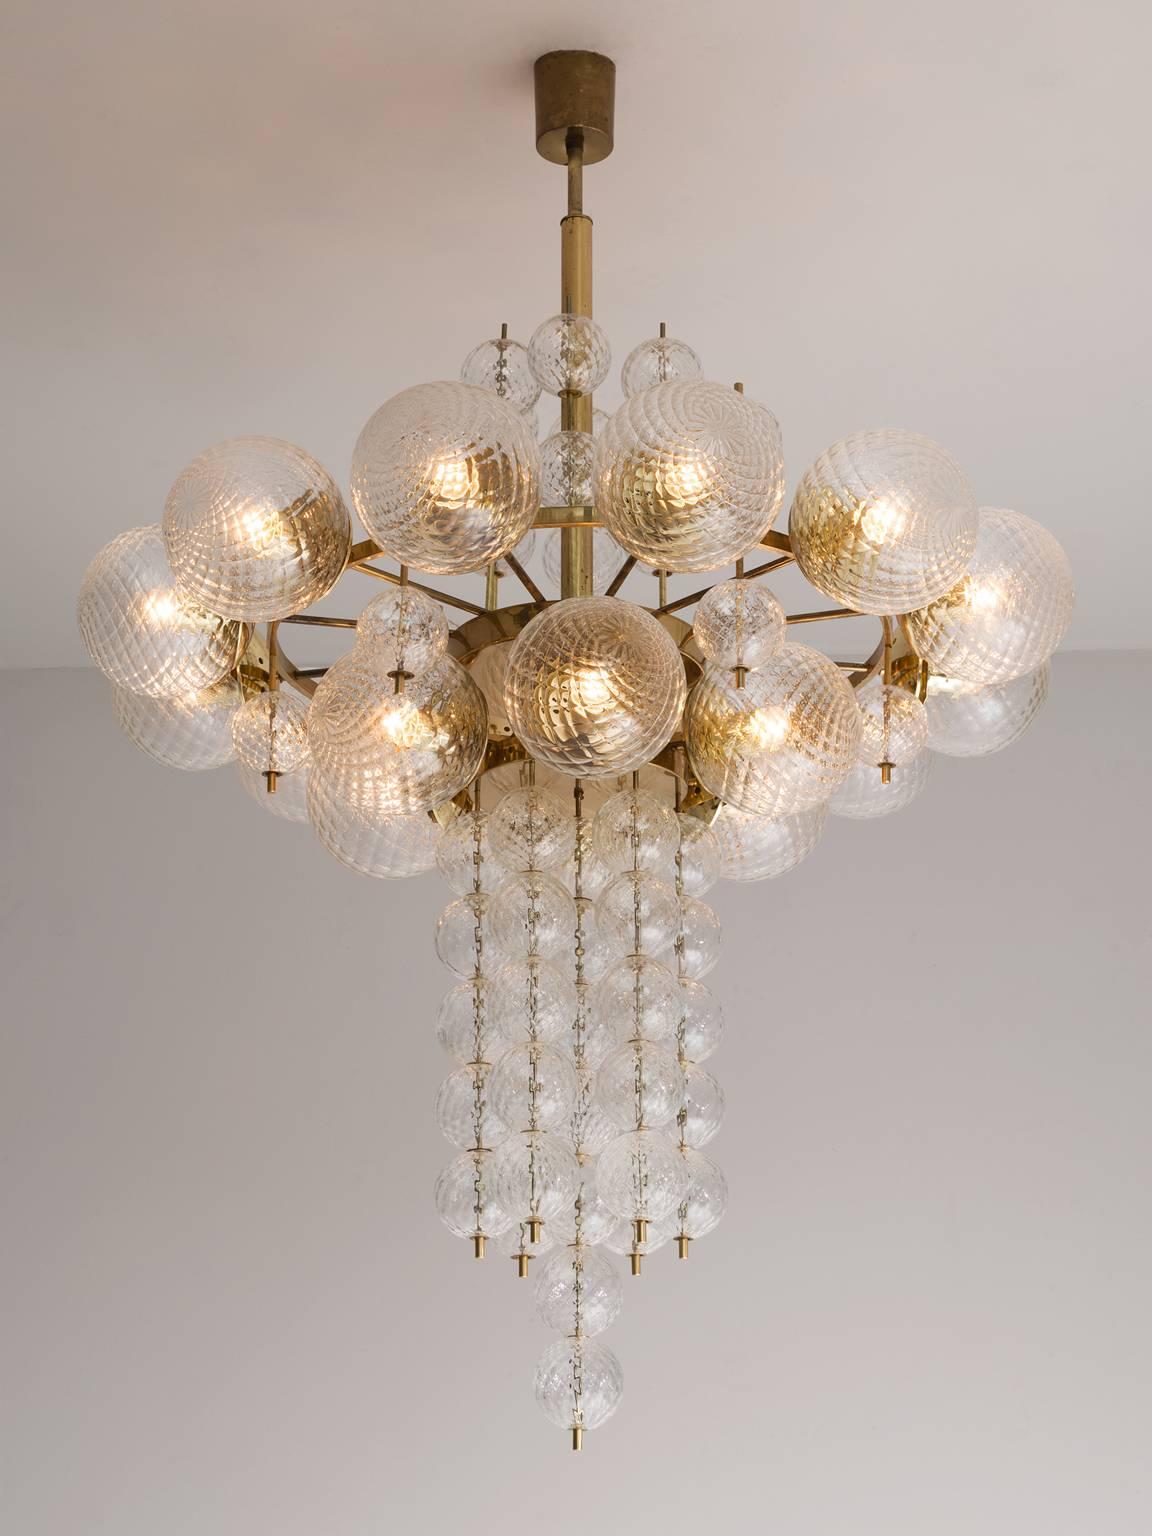 Mid-Century Modern Large Chandelier in Brass with Structured Glass